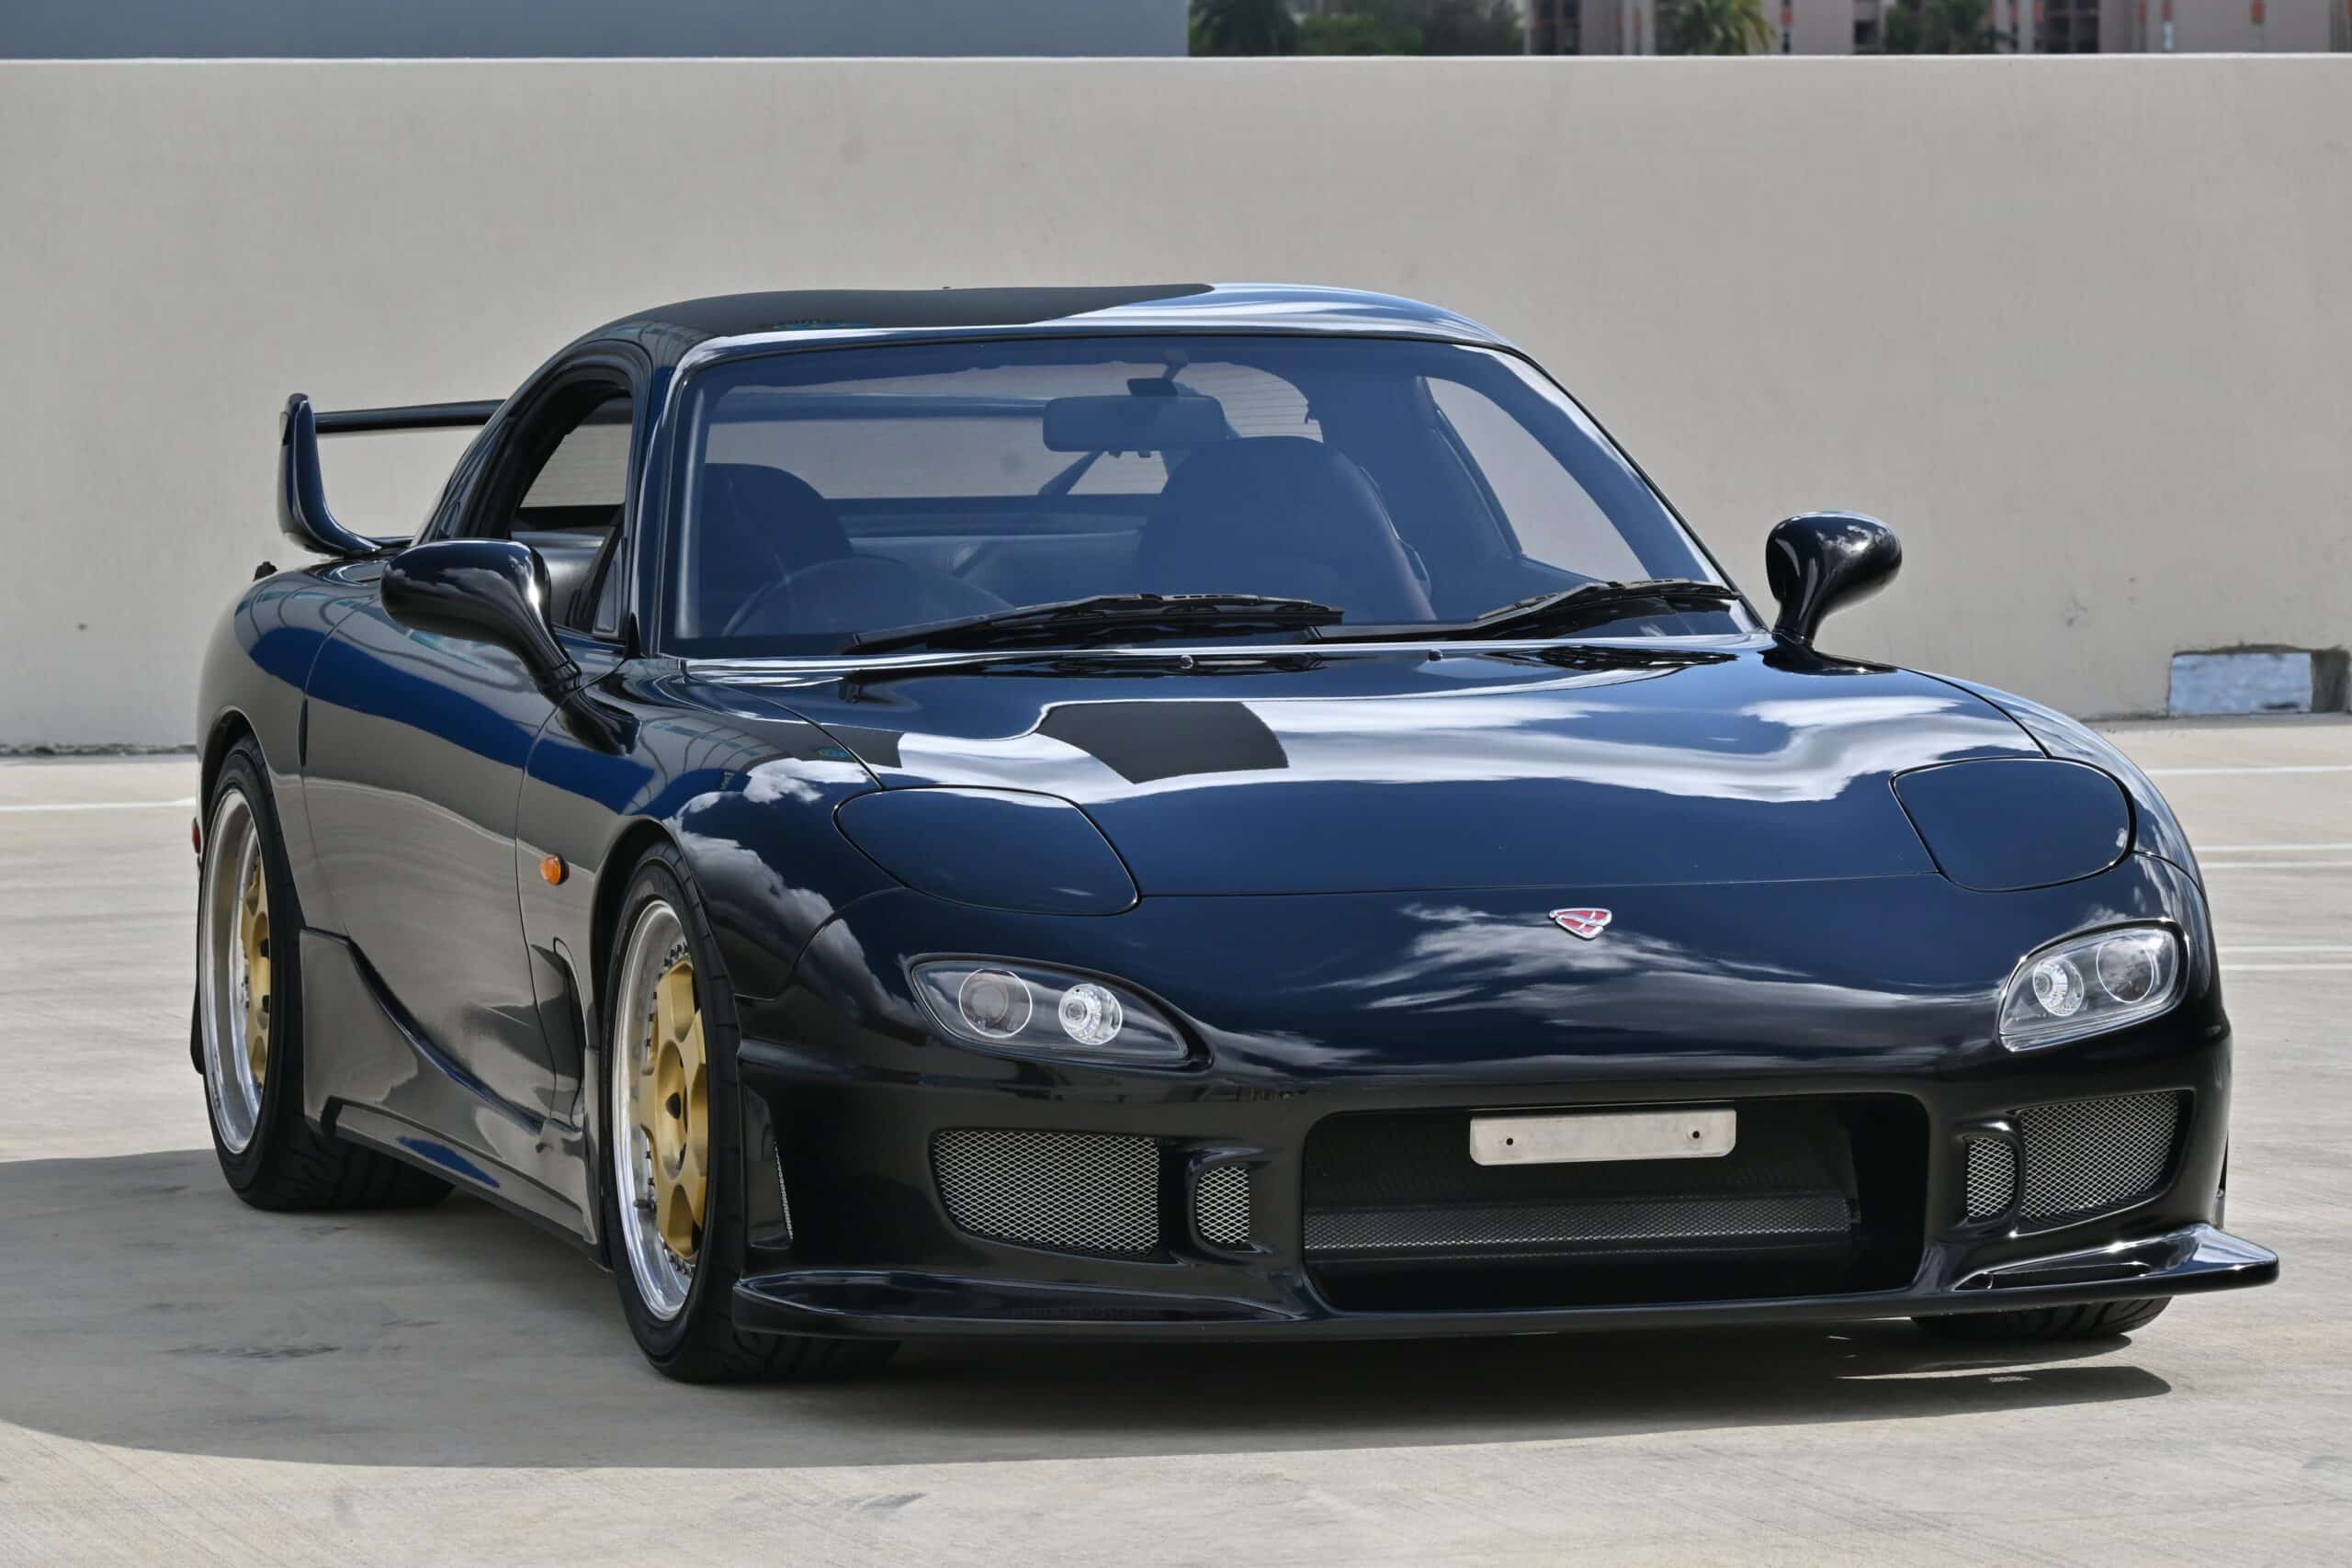 1994 Mazda RX-7 Efini Type R Single Turbo TD-06 450+HP / HKS Coilovers / Over $30,000 in receipts / records Original Paint / fully documented / Turn key